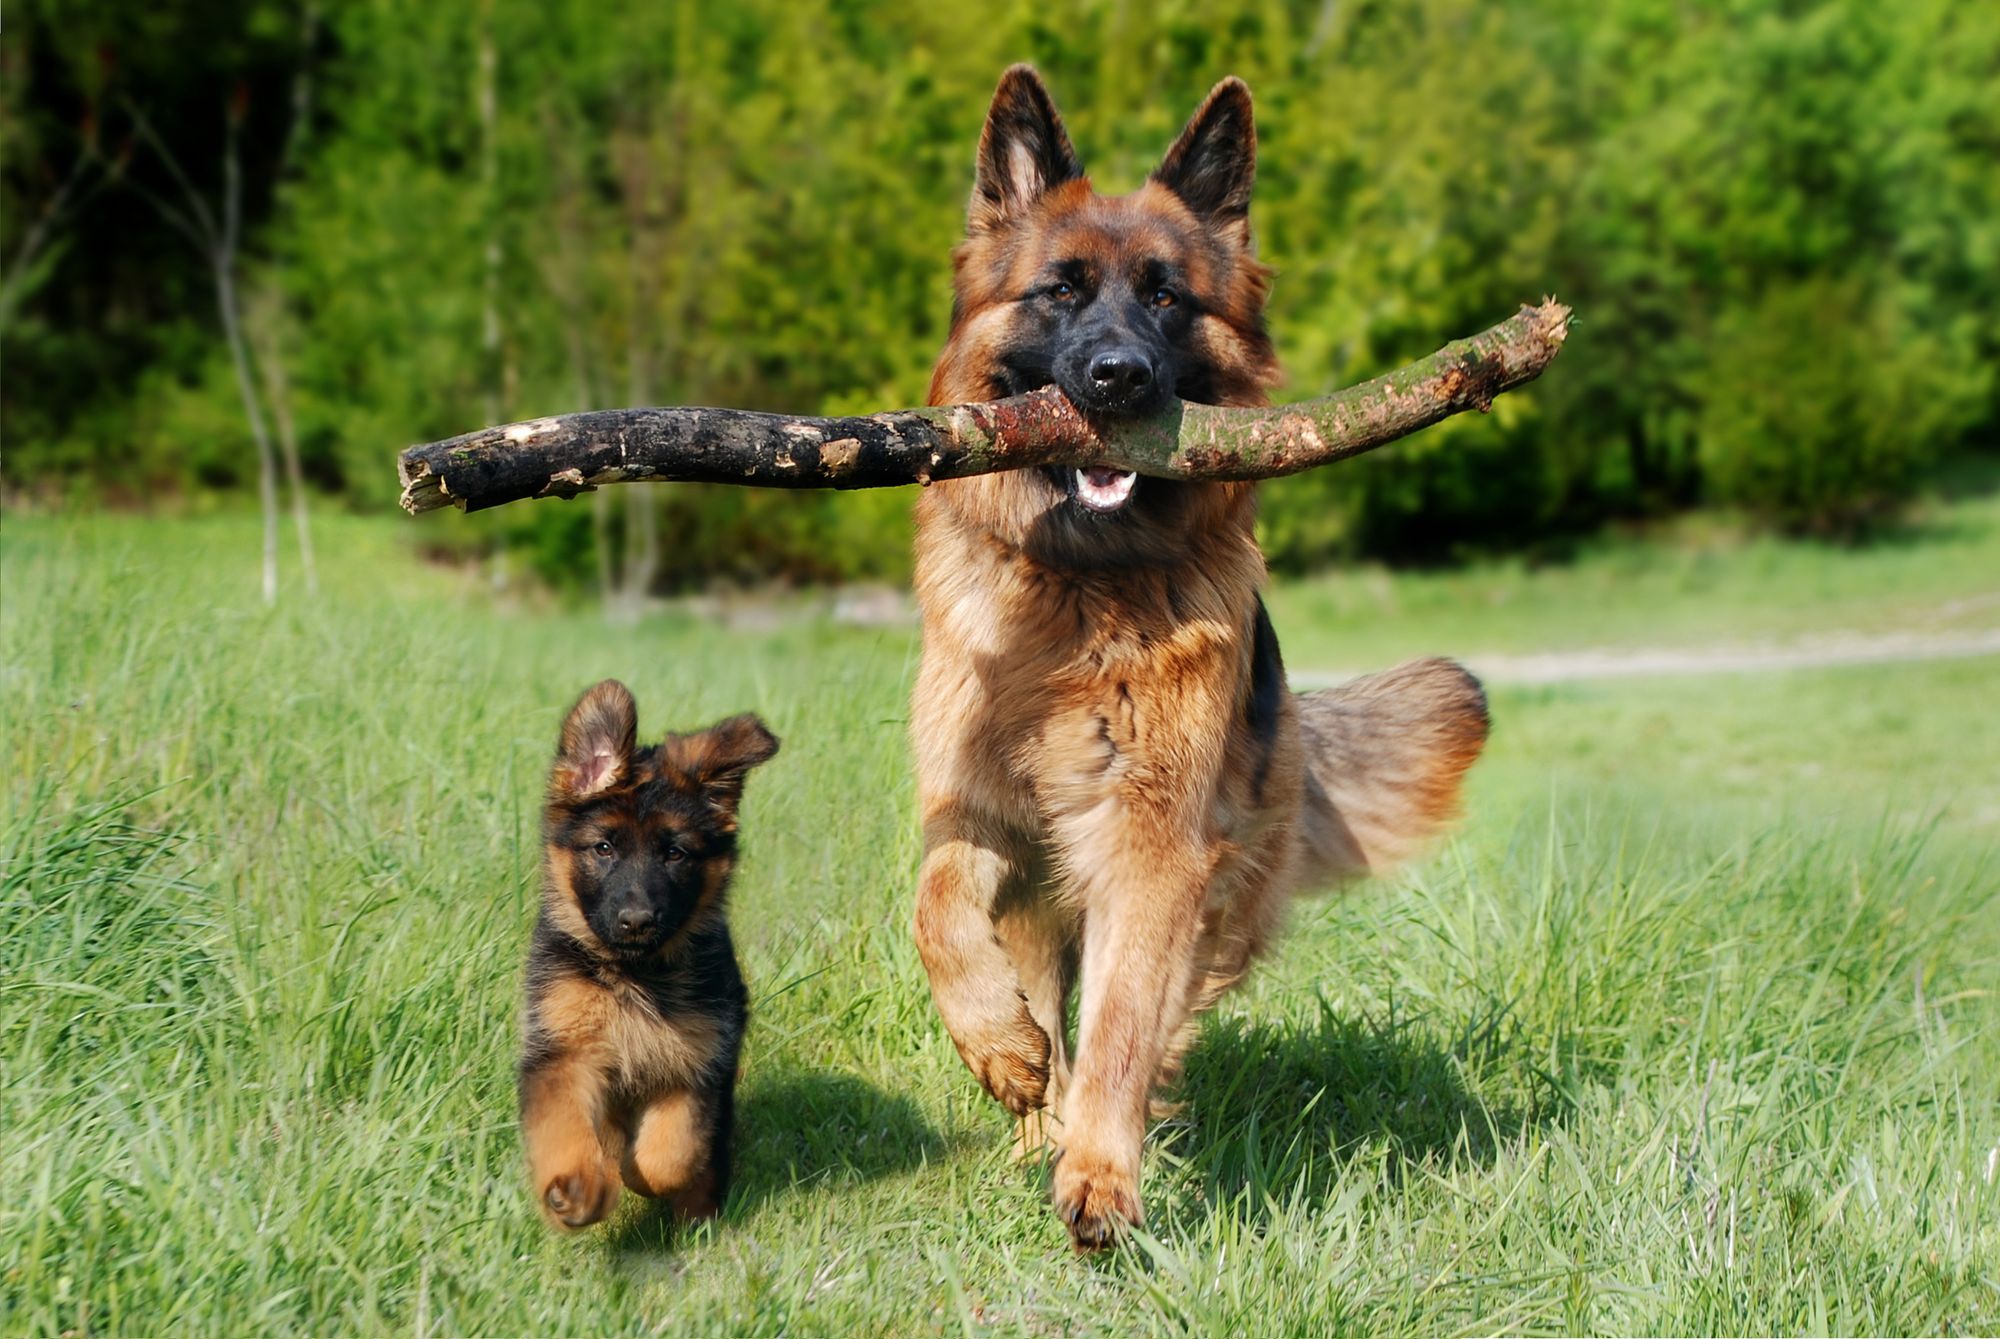 A puppy running alongside a German Shepherd dog with a stick in its mouth.